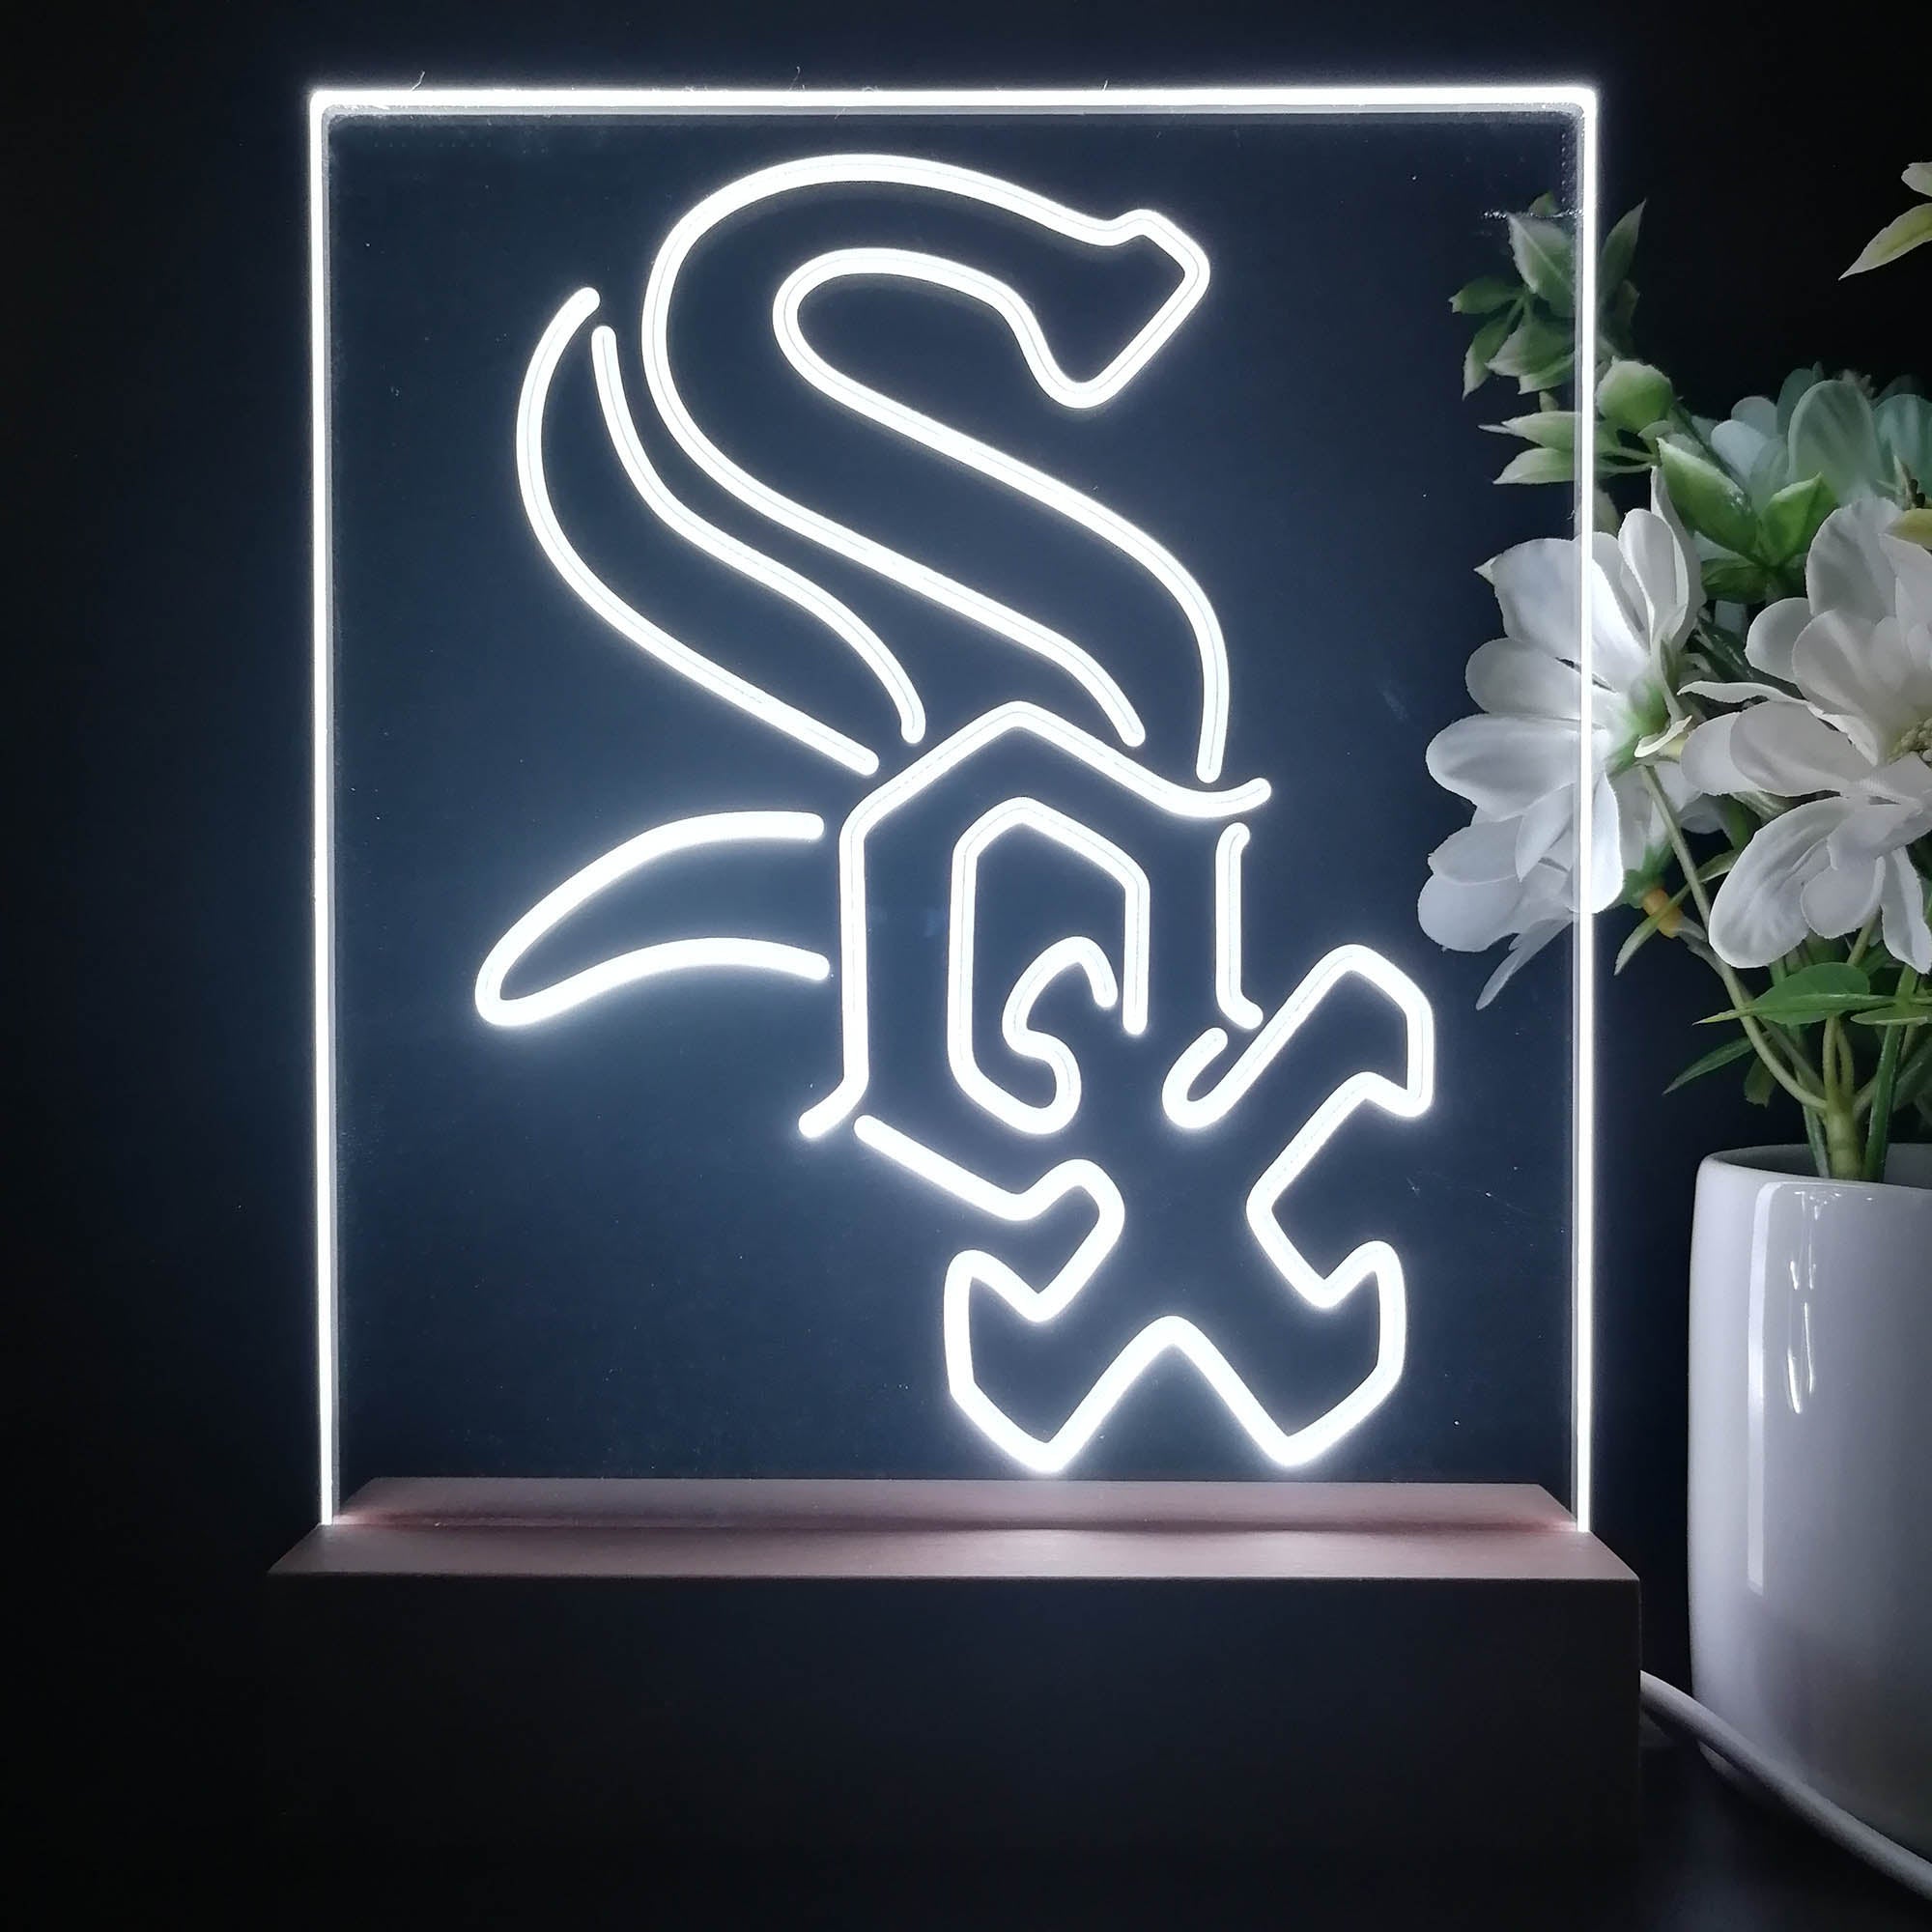 Chicago White Sox Neon Sign Table Top Lamp